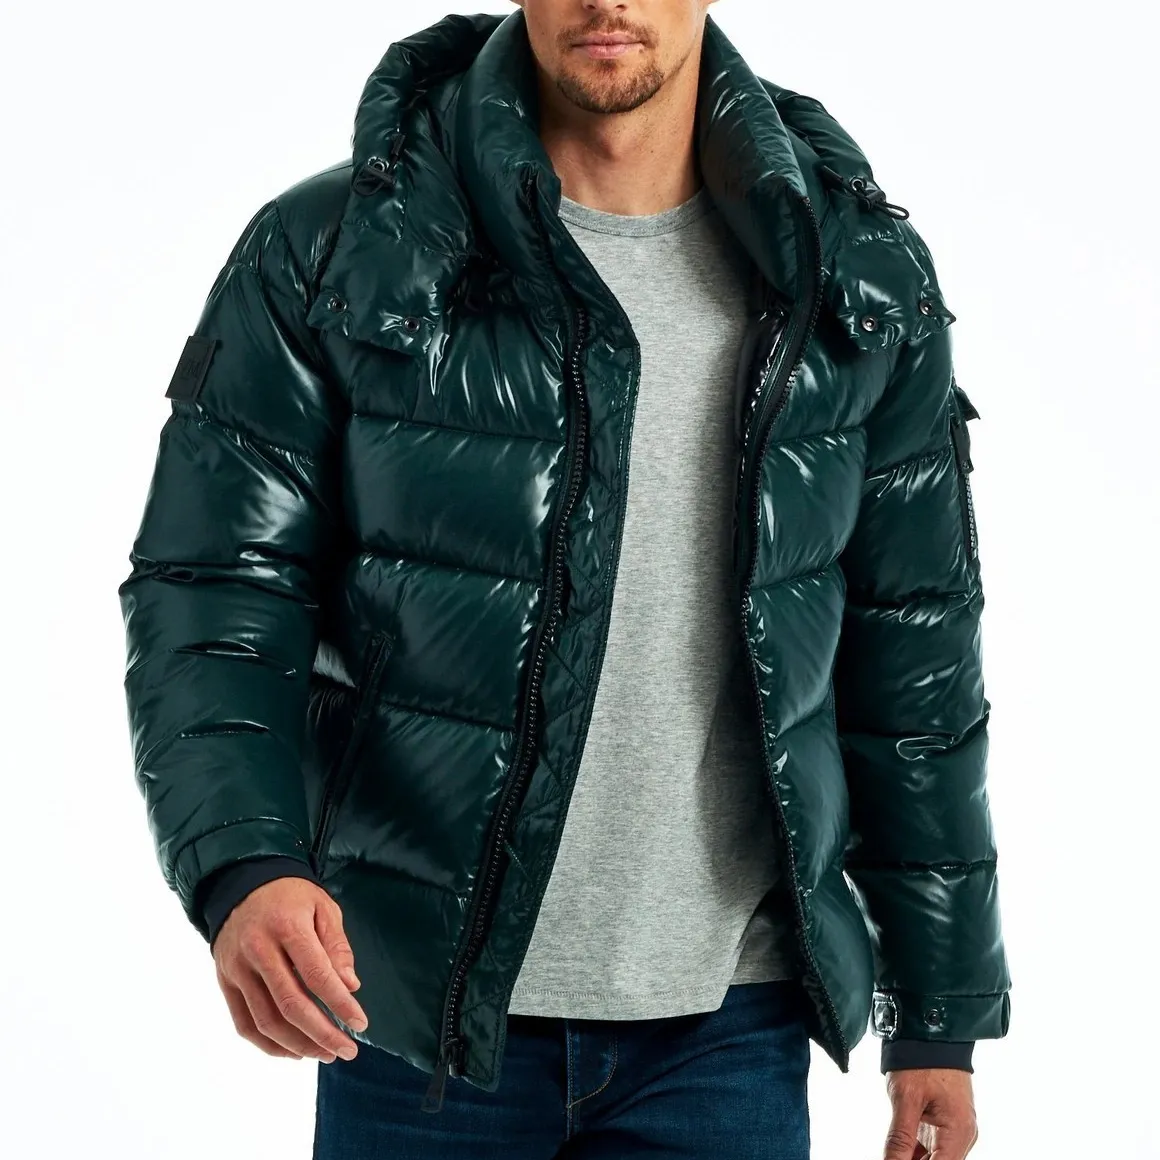 High Quality Winter Lightweight Padded Men's Green Shiny Bubble Puffer Jacket with Hood